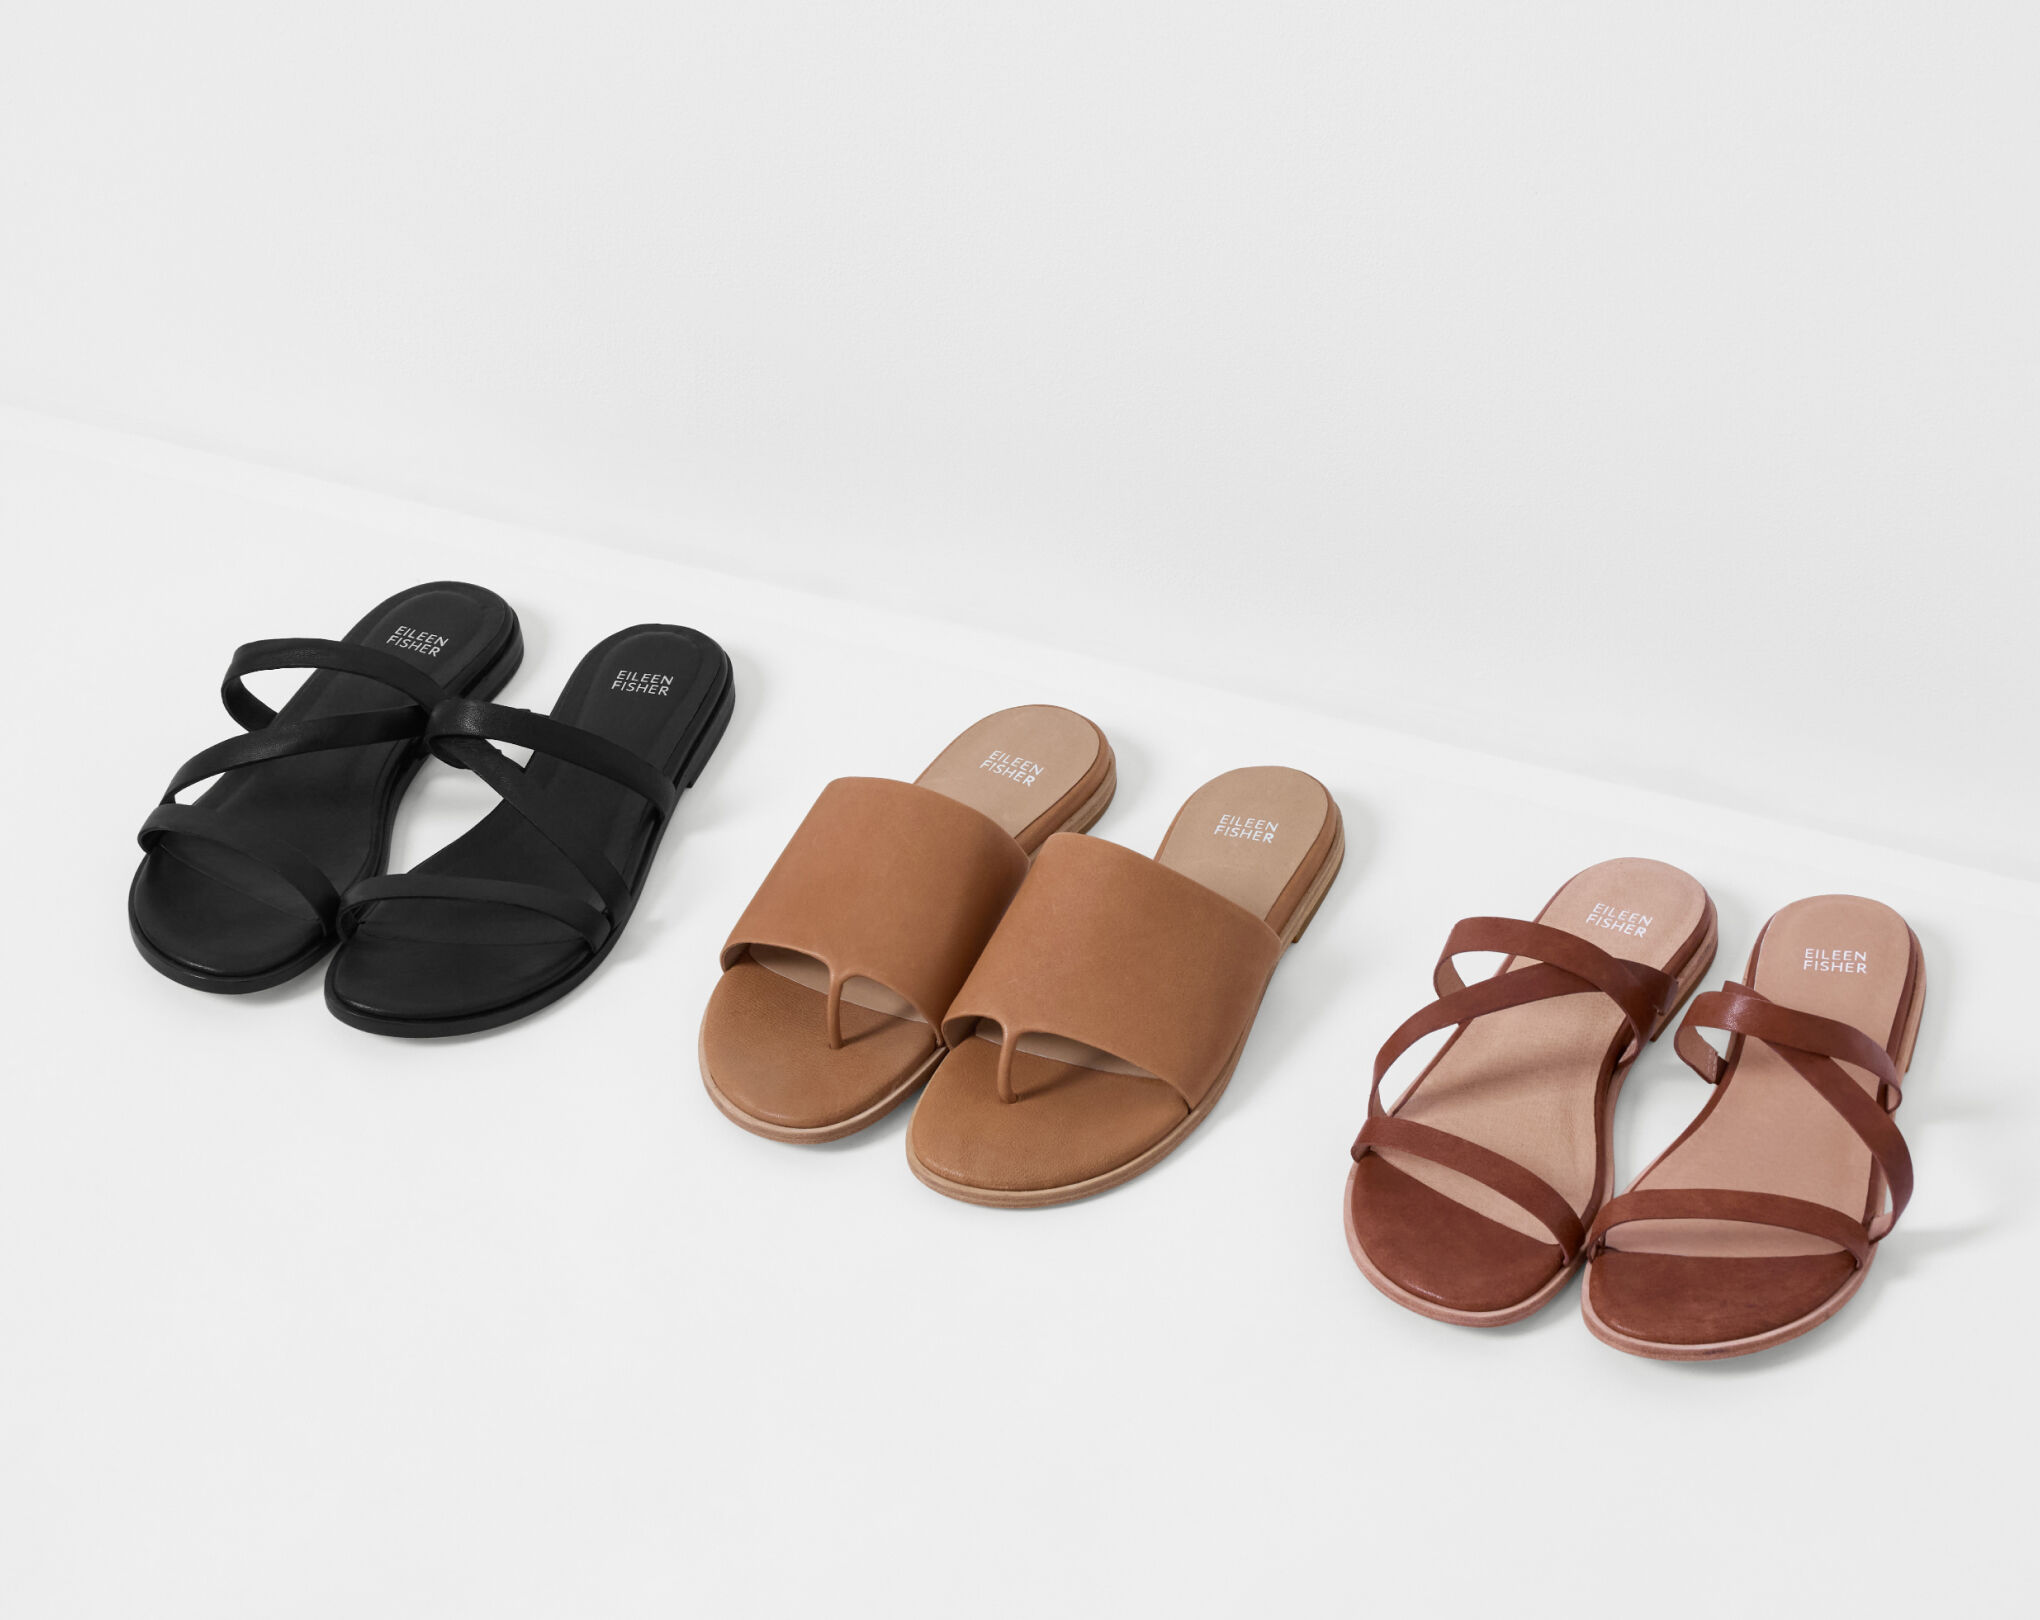 New Spring Sandals